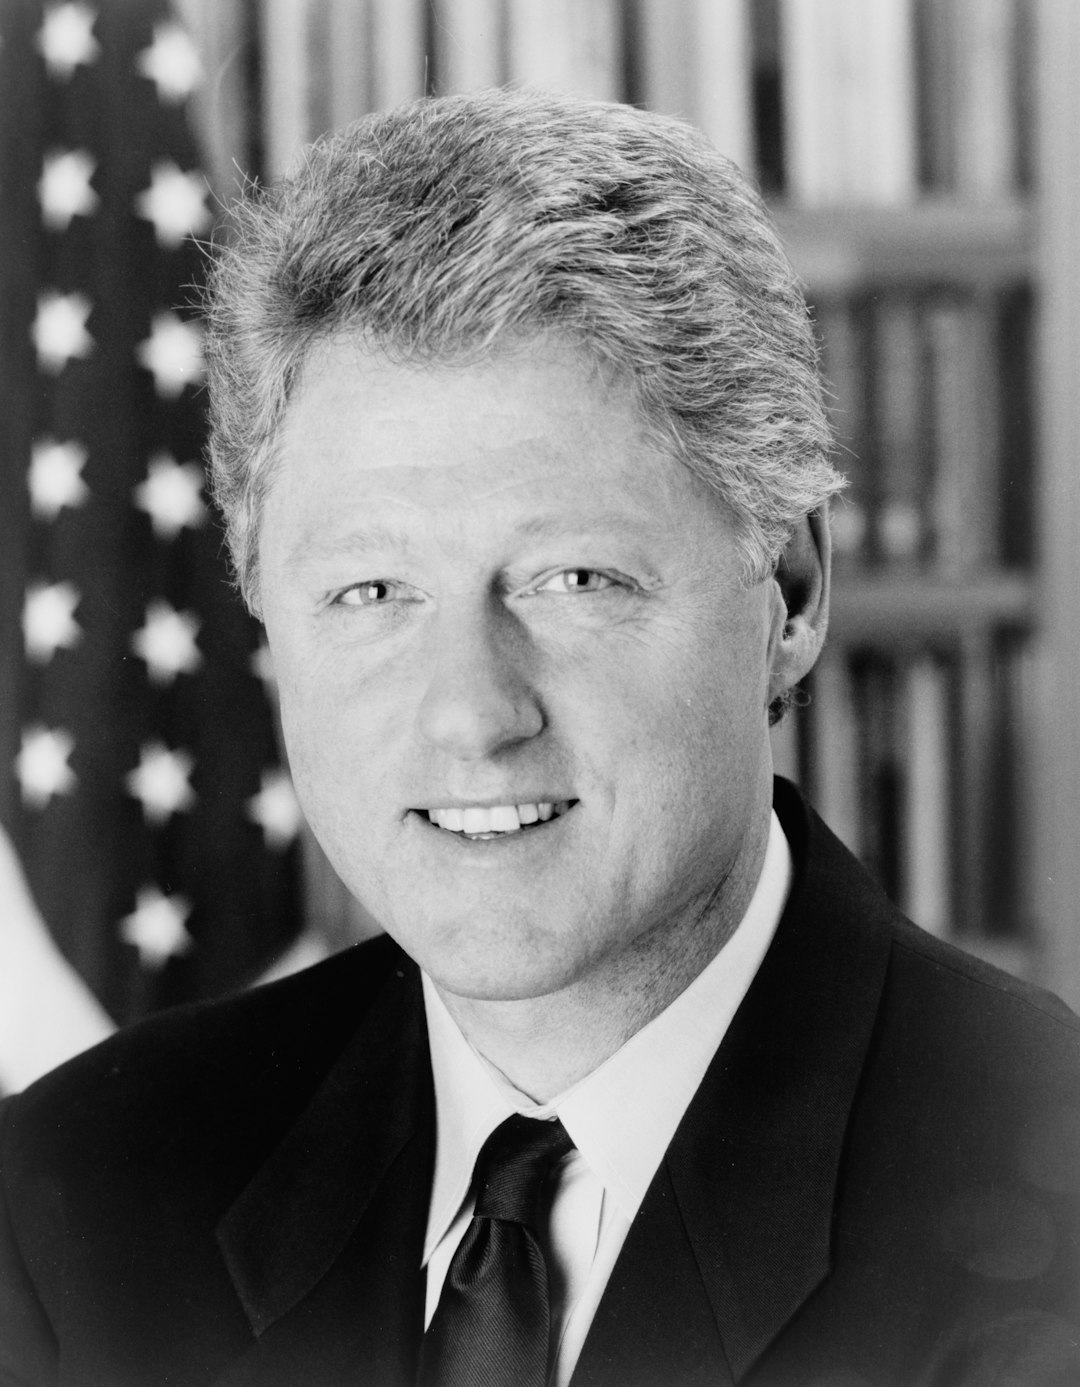 [Bill Clinton, head-and-shoulders portrait, facing front]. Photograph from the Presidential File Collection, [1992]. Library of Congress Prints & Photographs Division. 

https://www.loc.gov/item/93505822/